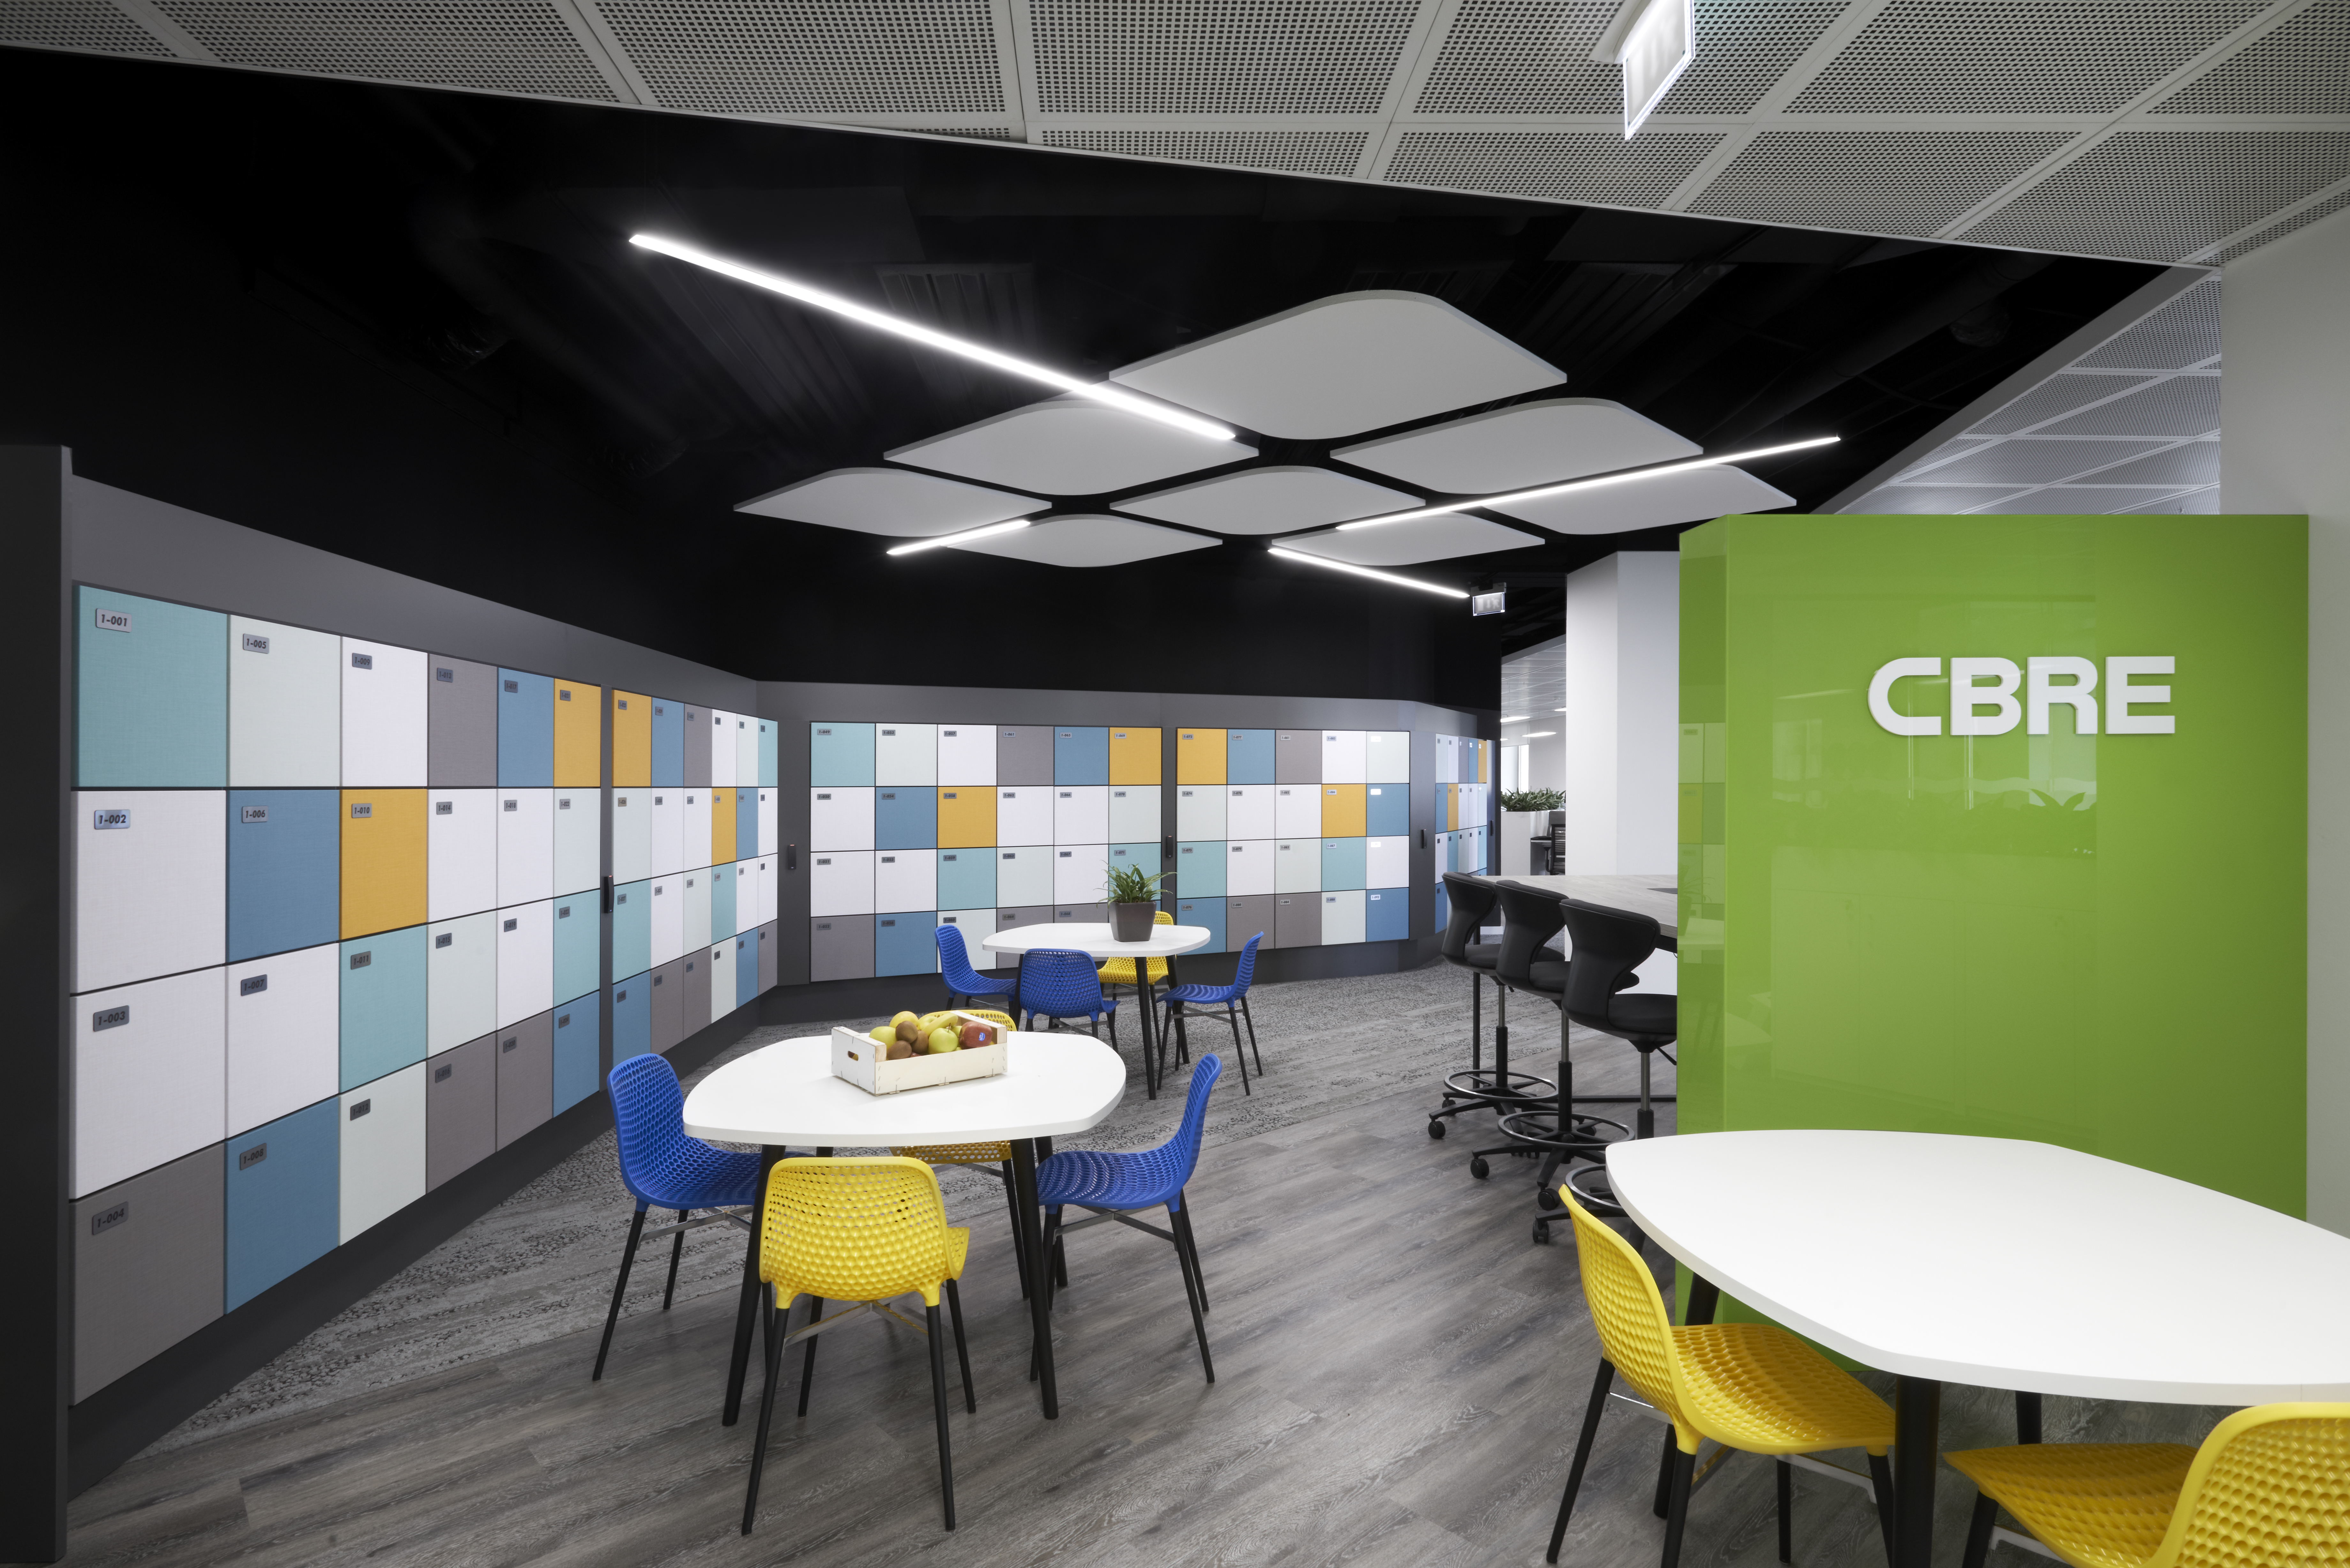 Armstrong Ceiling Solutions contribute to new CBRE HQ